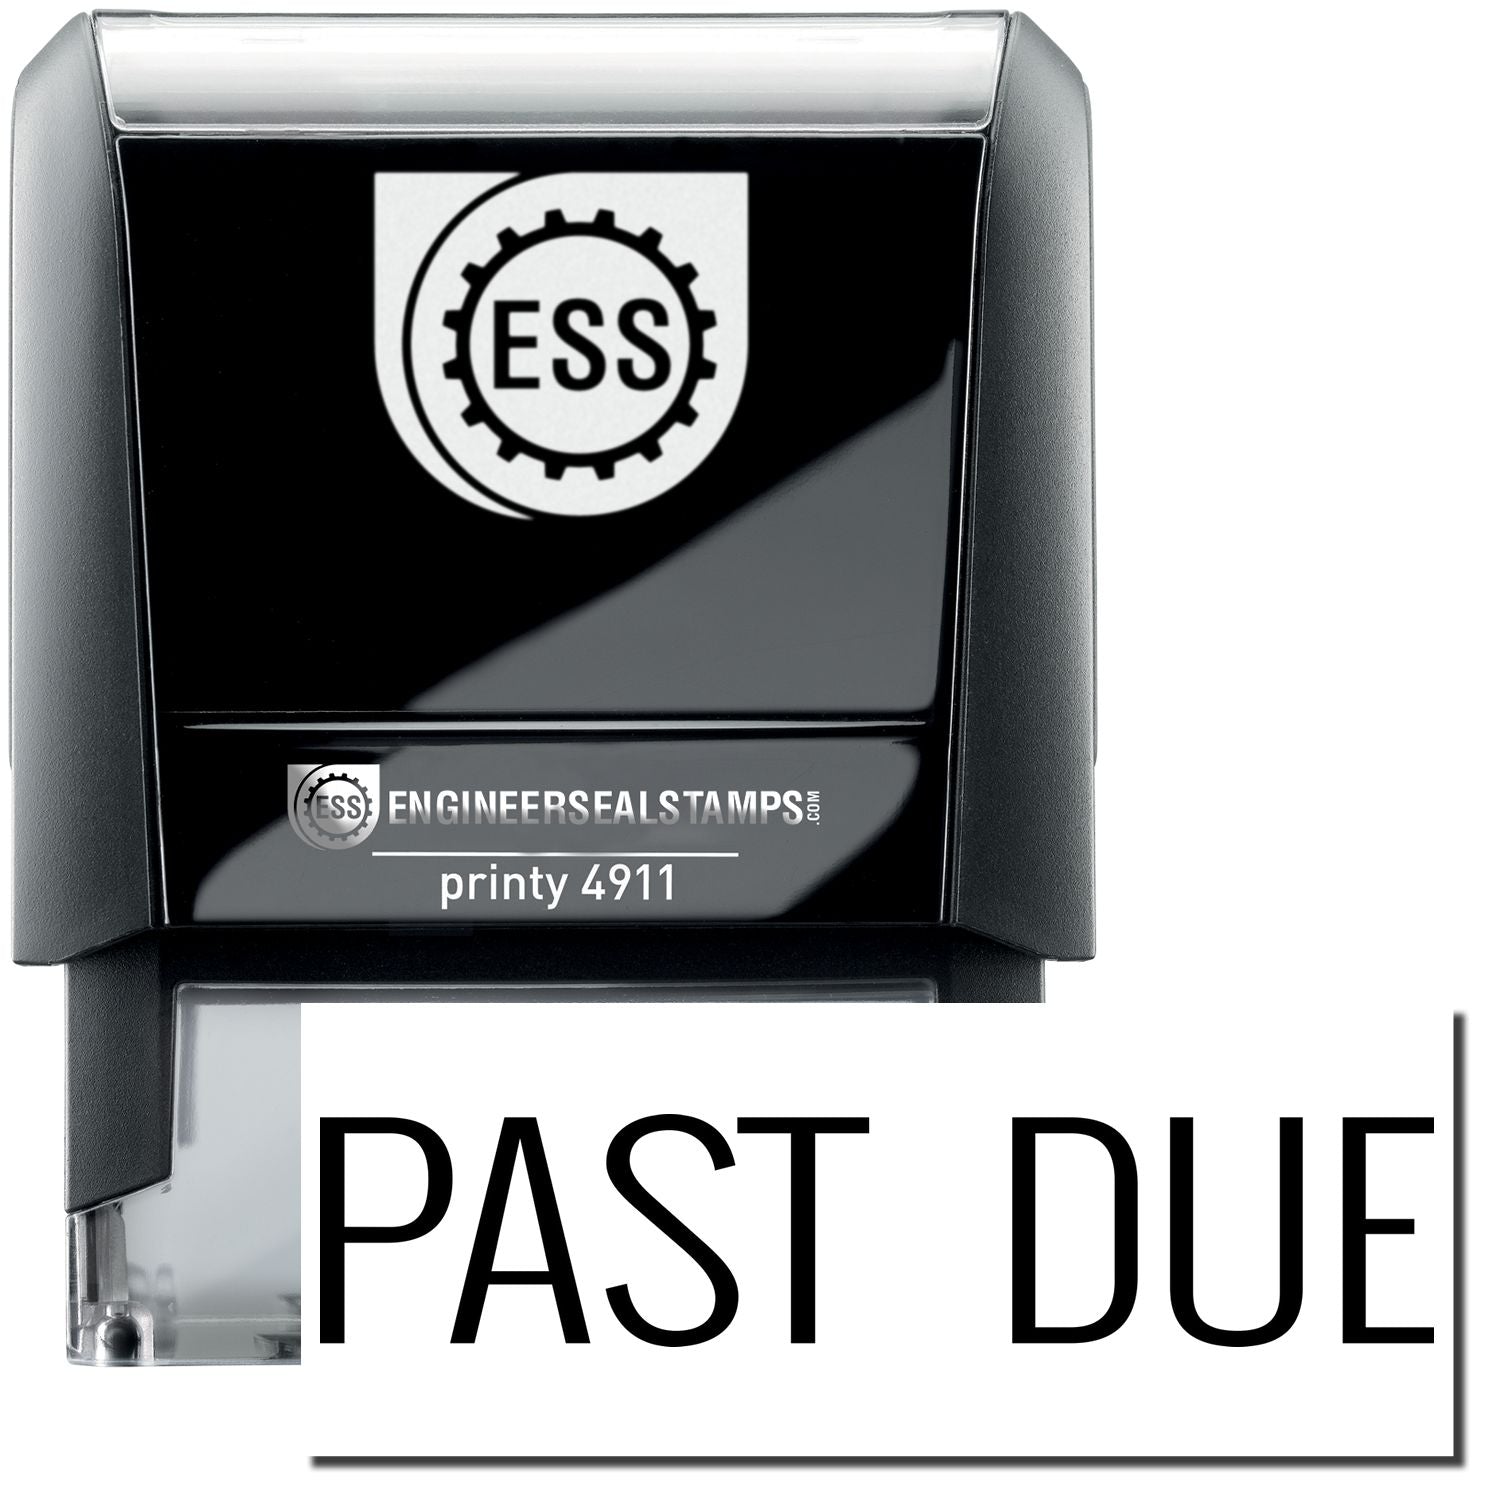 A self-inking stamp with a stamped image showing how the text "PAST DUE" in a narrow font is displayed after stamping.